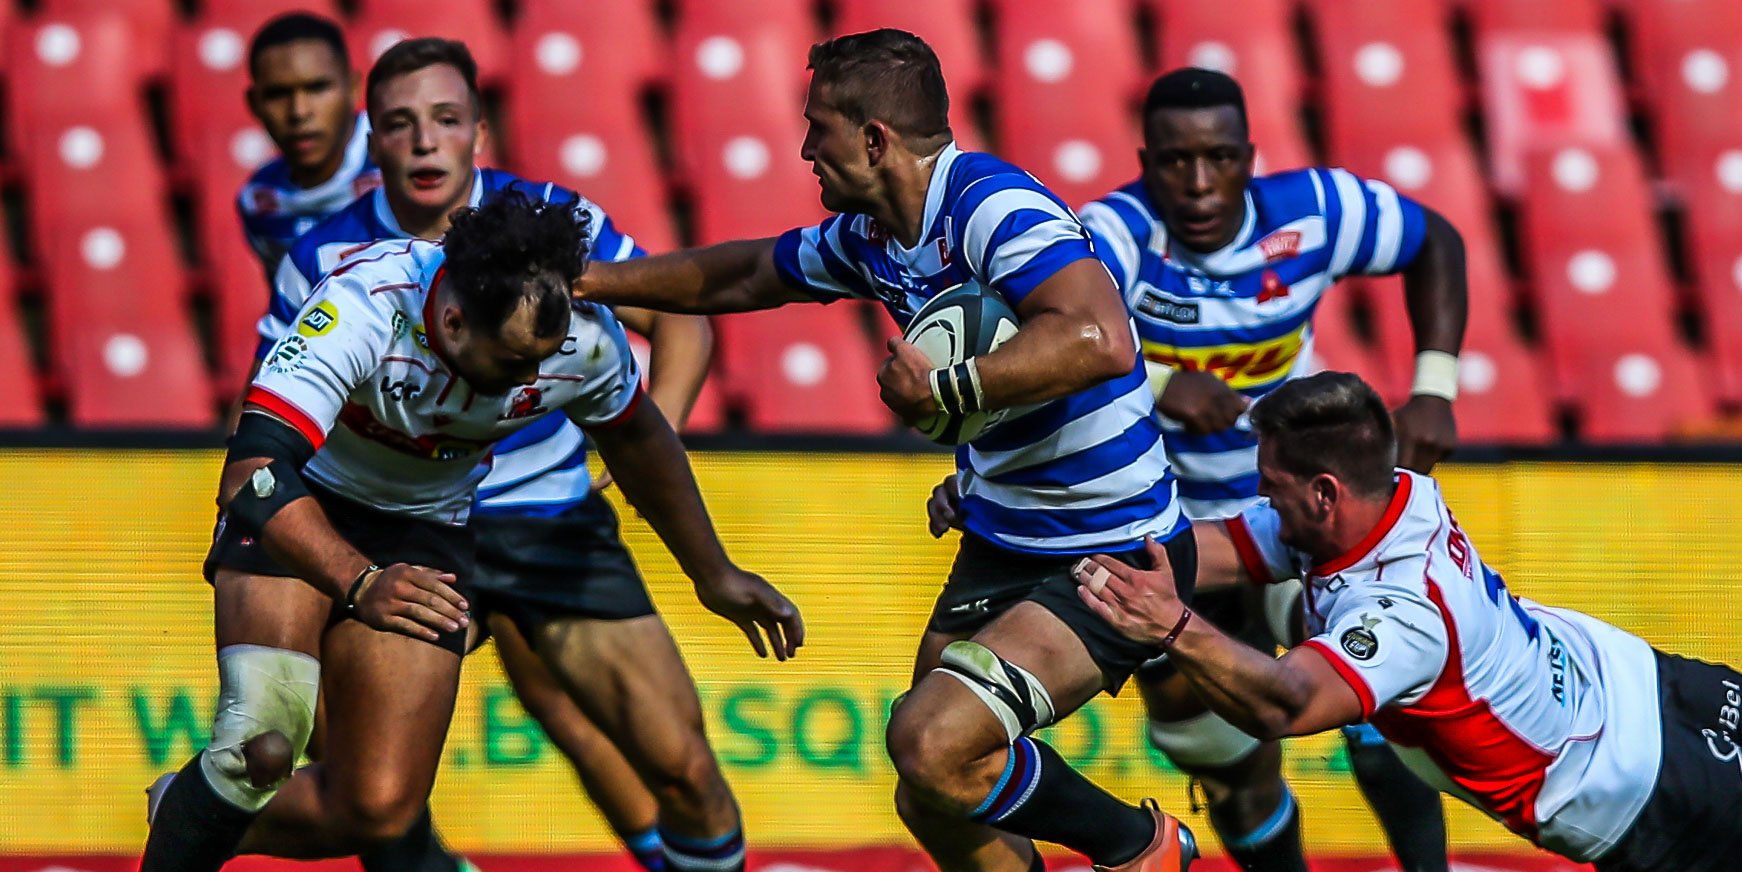 Marcel Theunissen on the charge for DHL WP.